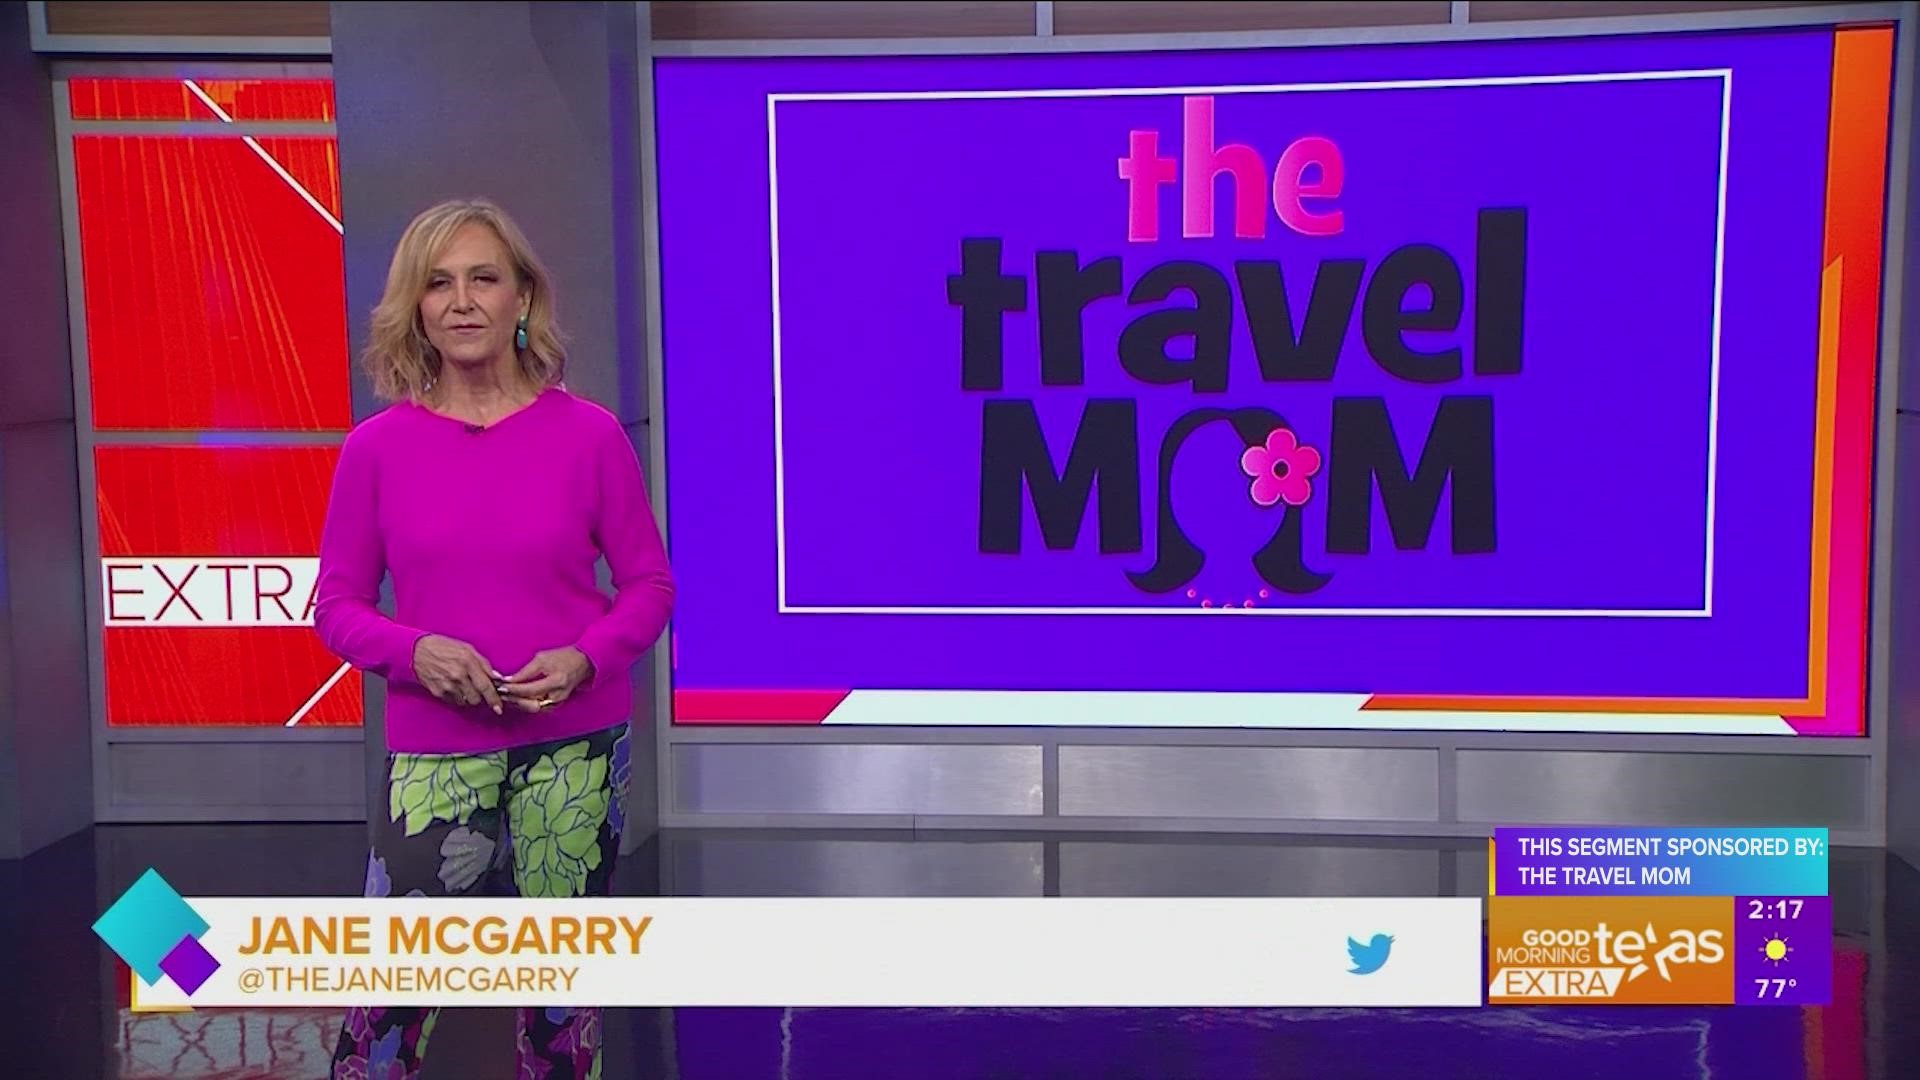 This segment is sponsored by The Travel Mom.